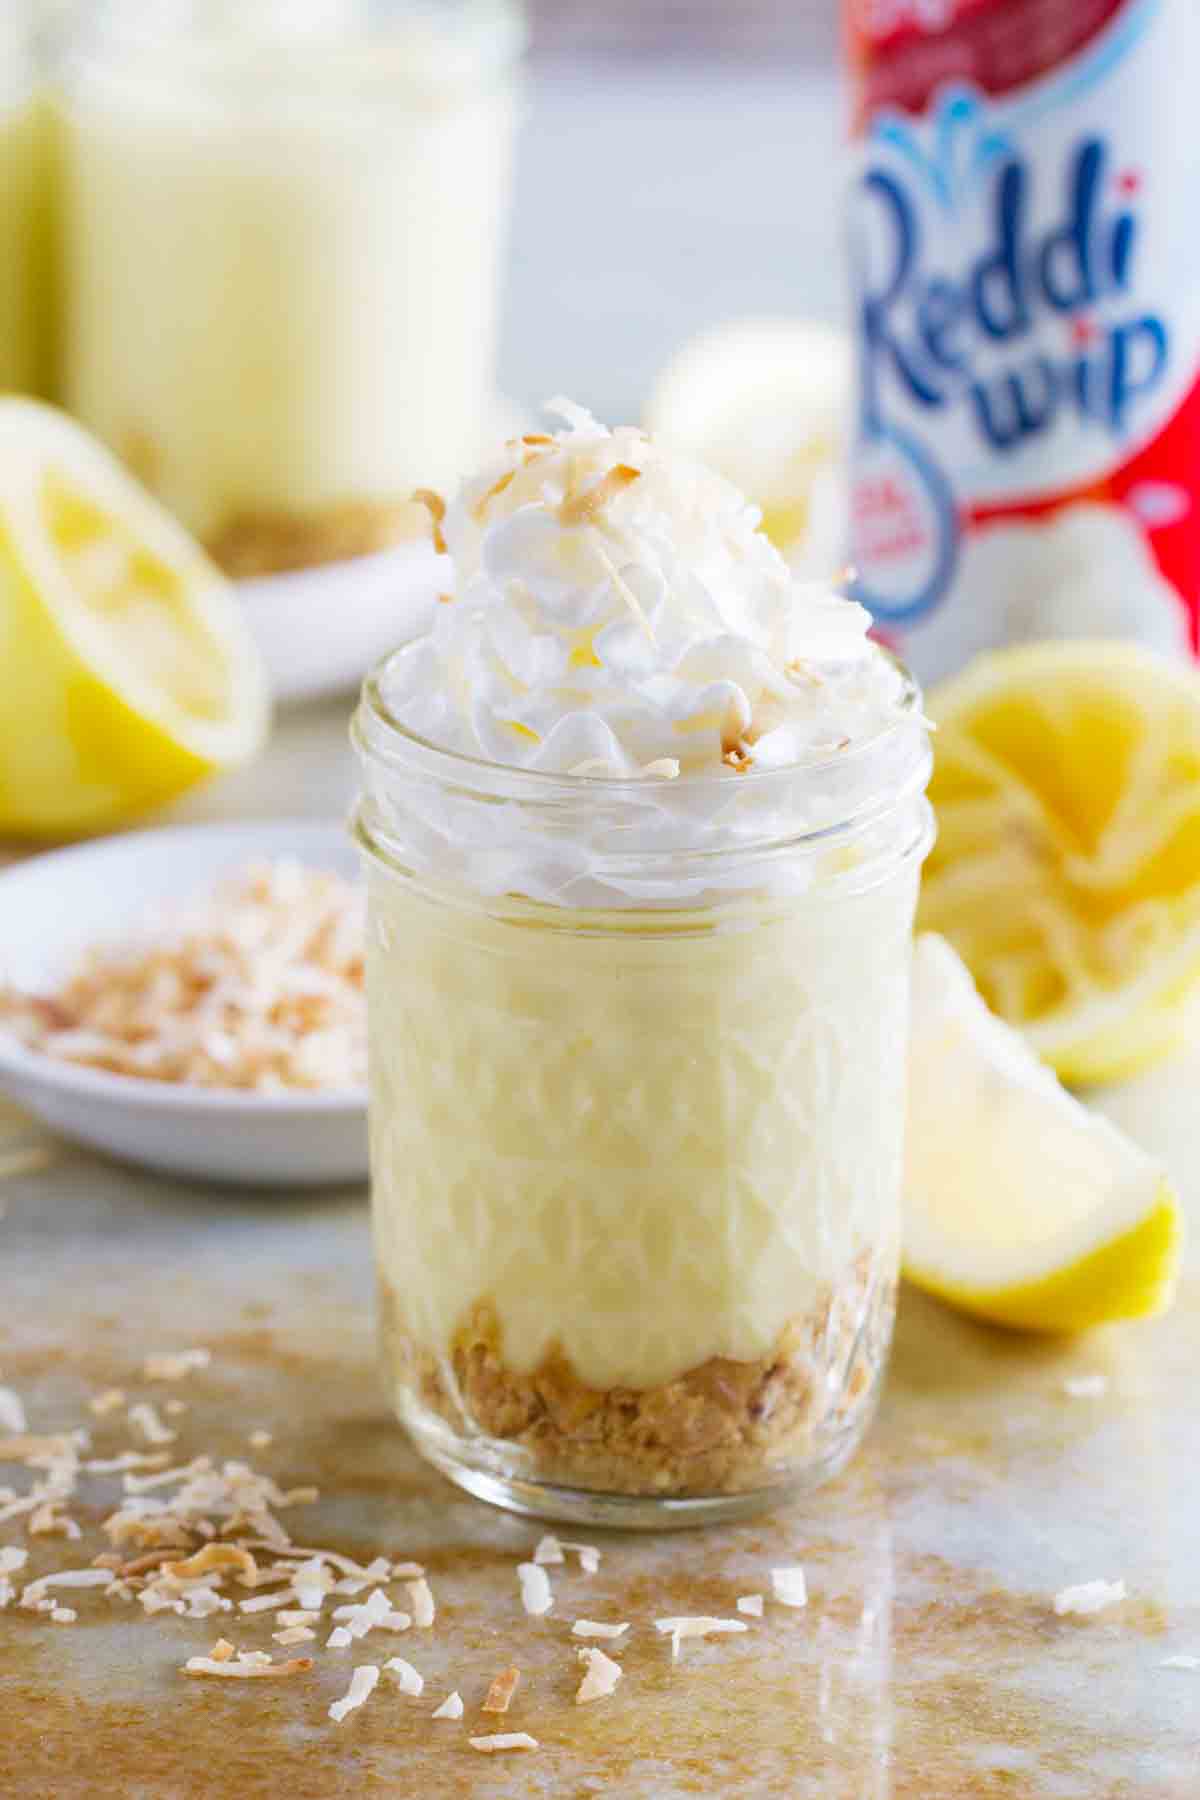 Jar with cookies, homemade lemon pudding, and whipped cream with toasted coconut.